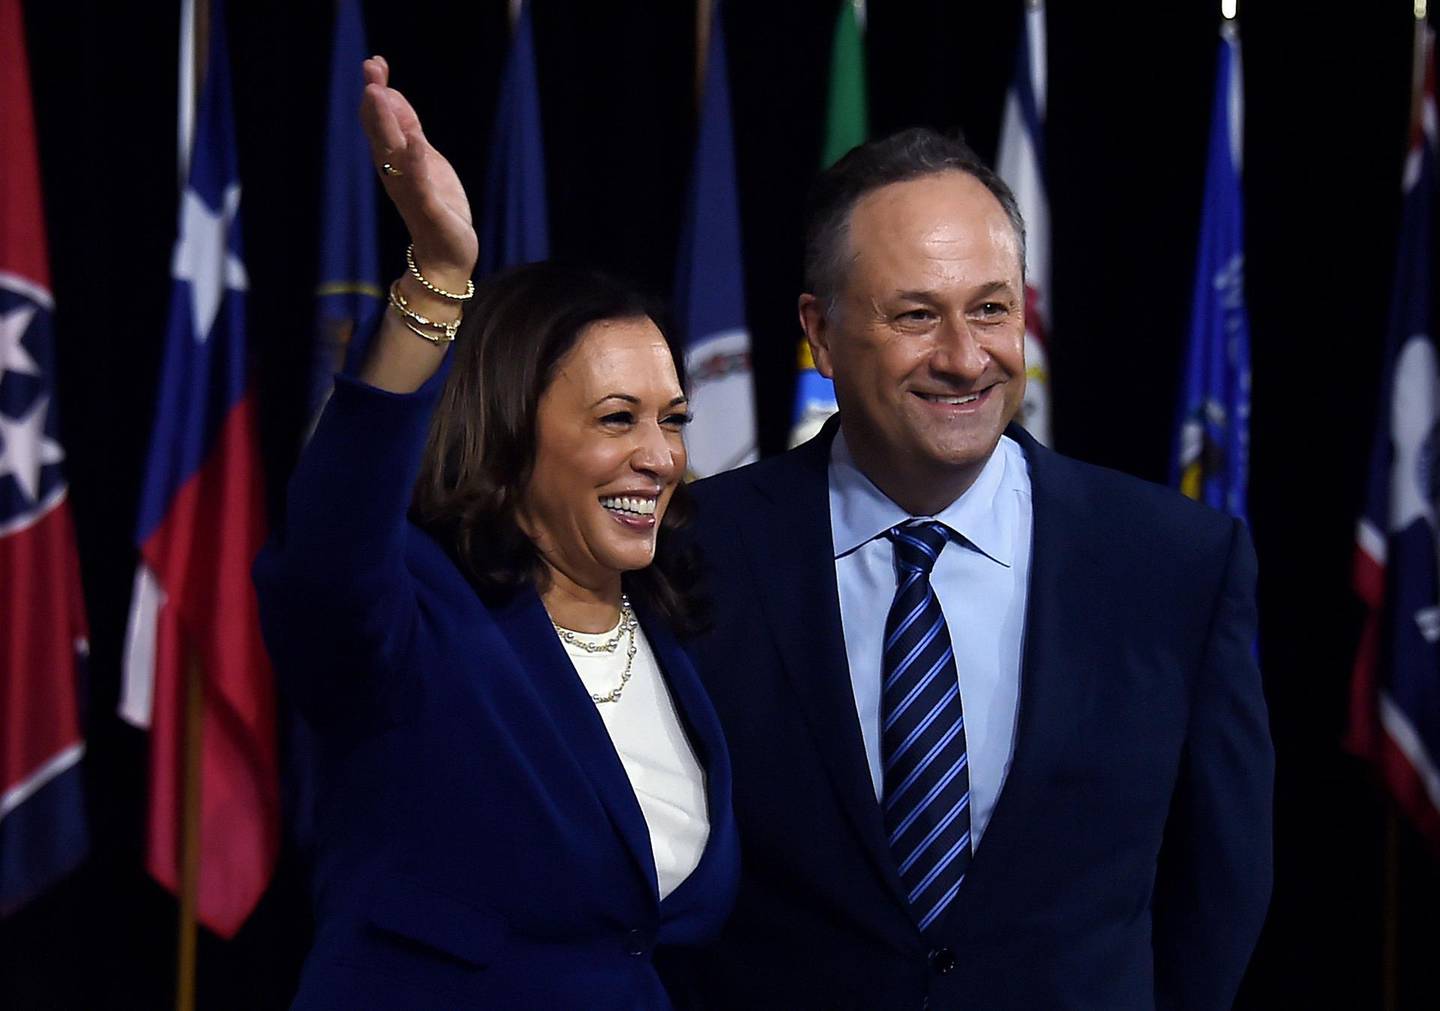 Democratic vice presidential running mate, US Senator Kamala Harris and her husband Douglas Emhoff pose on stage after the first Biden-Harris press conference in Wilmington, Delaware, on August 12, 2020. / AFP / Olivier DOULIERY
